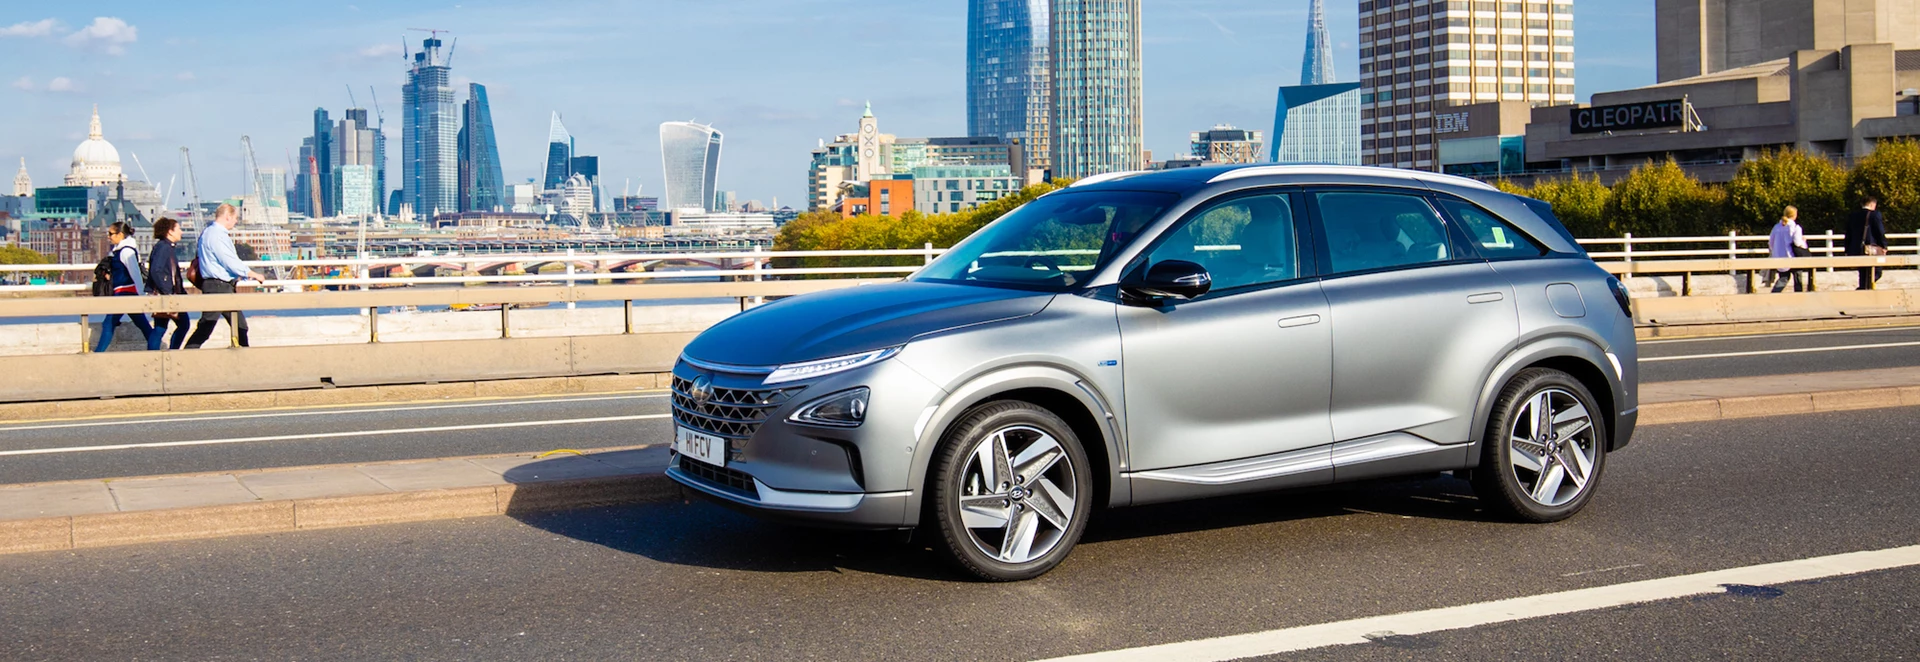 Why the Hyundai Nexo will be a strong EV rival in 2019